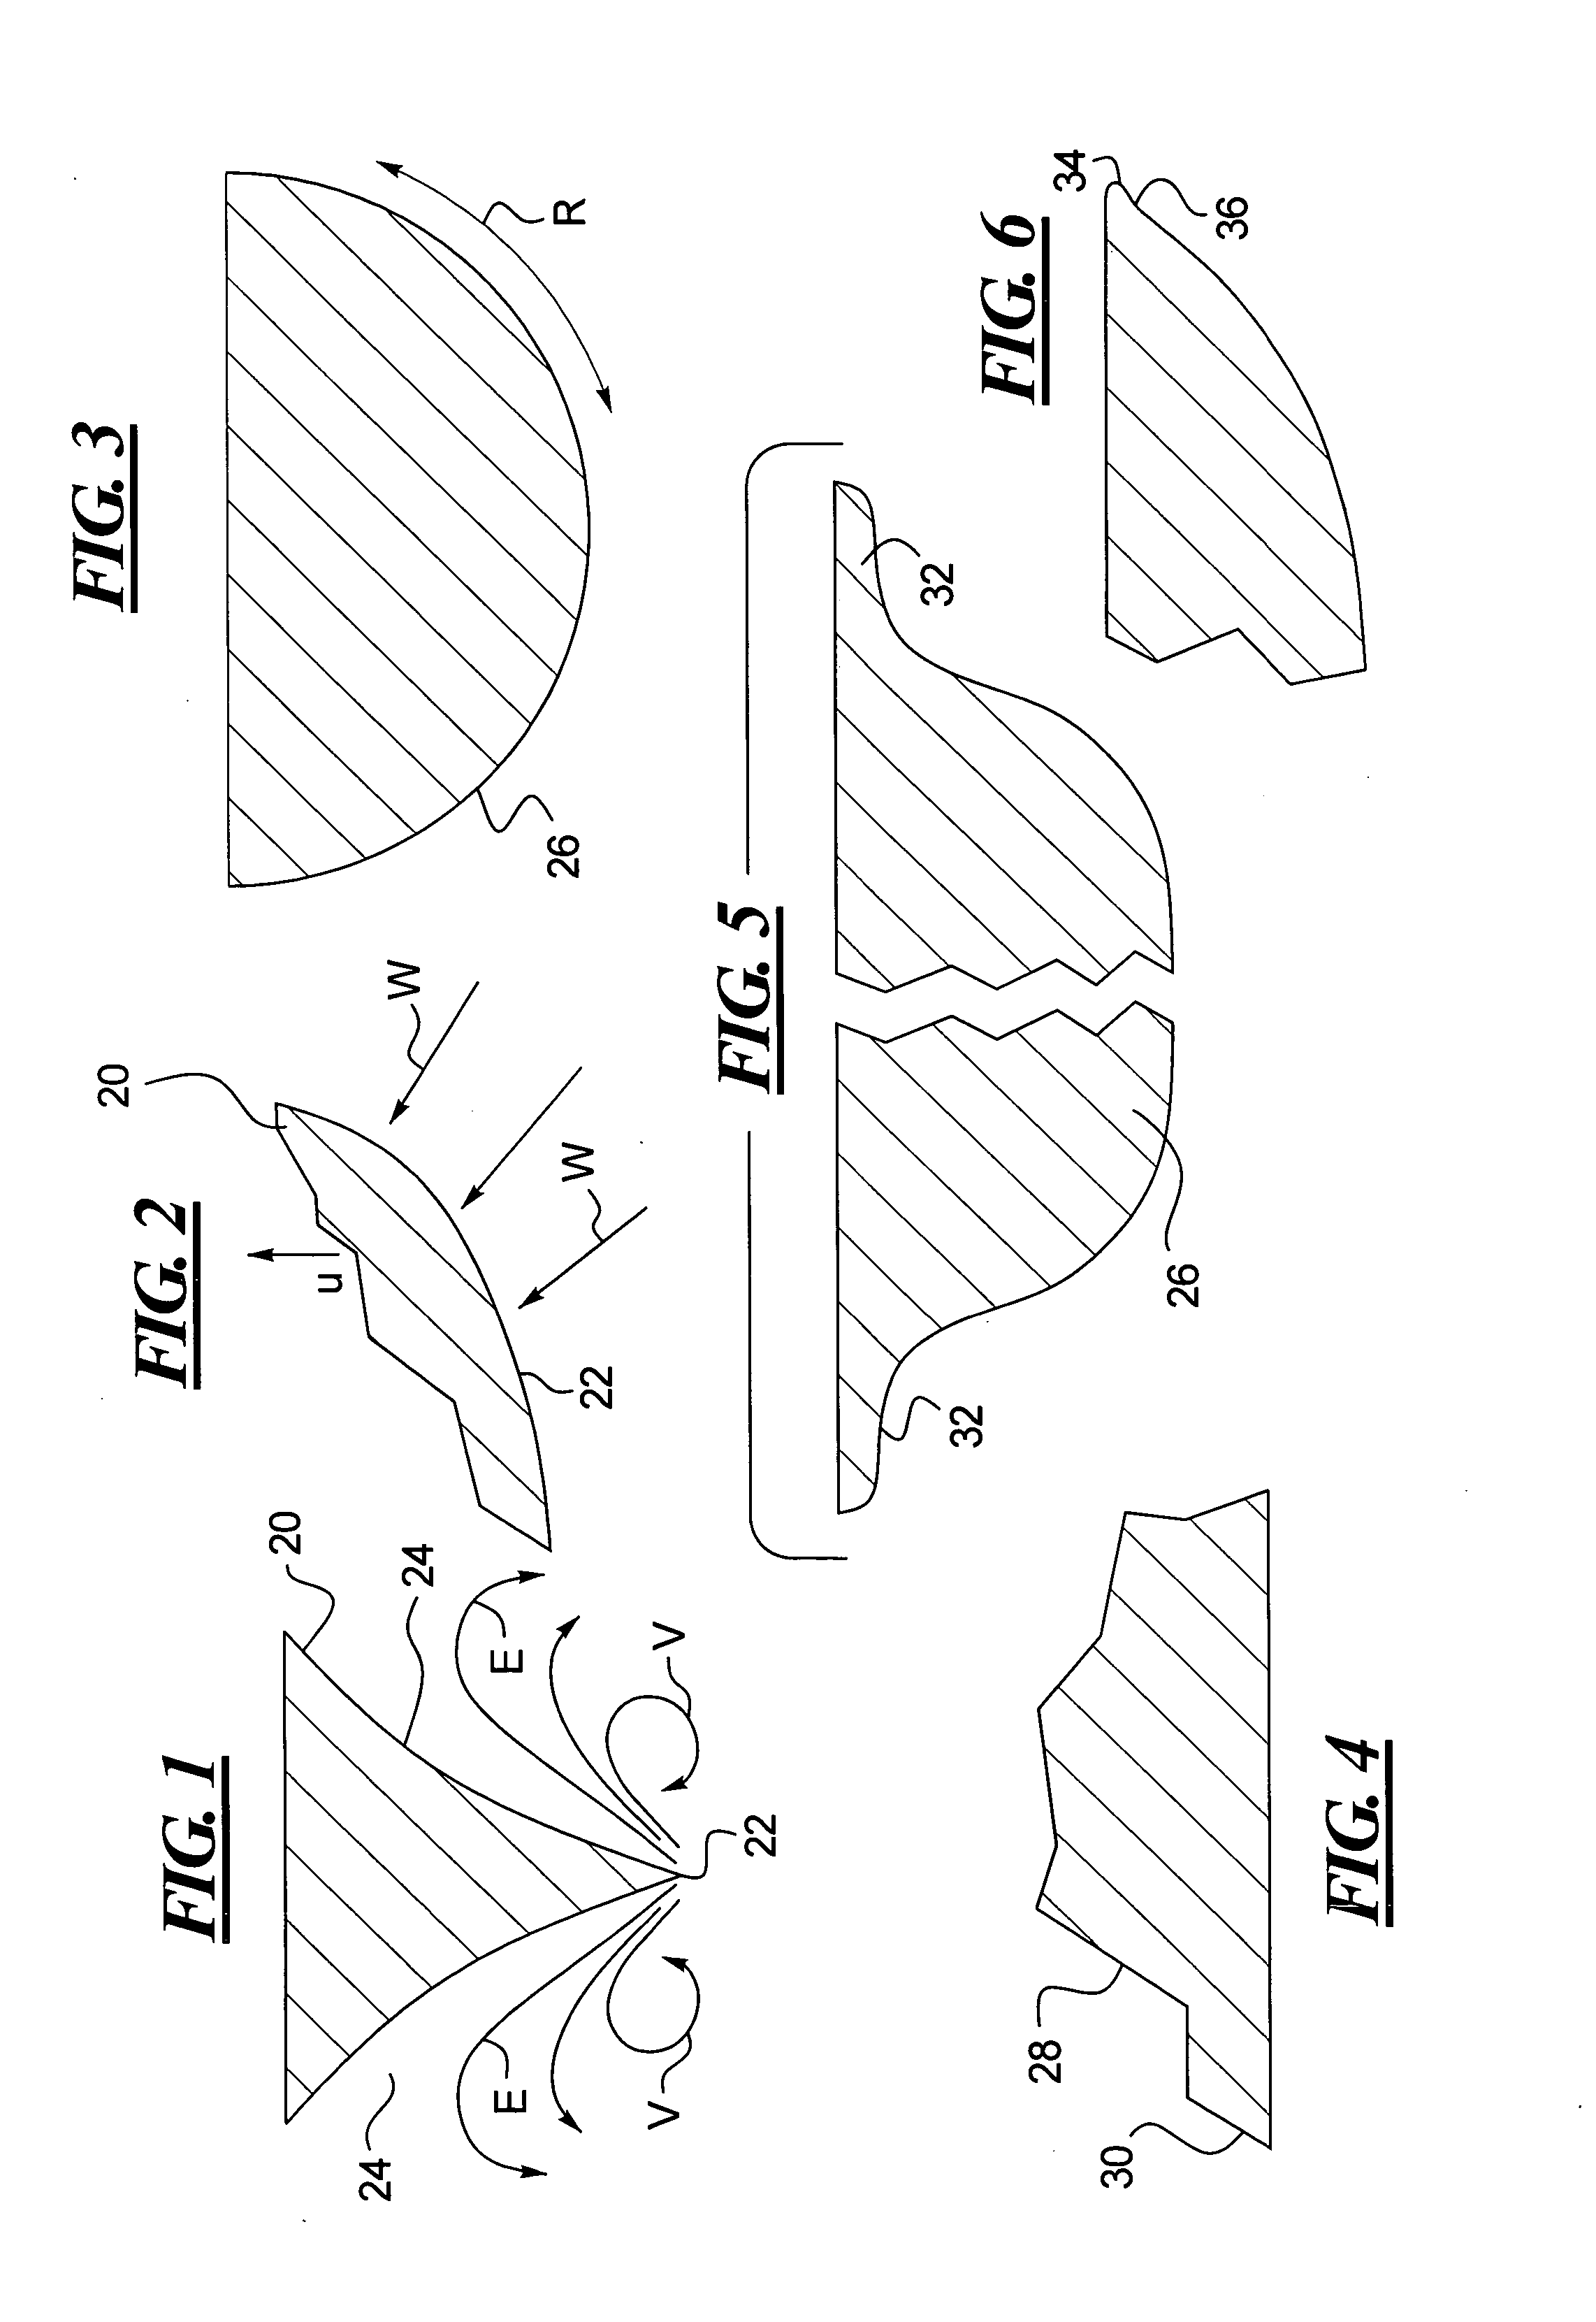 Winged hull for a watercraft